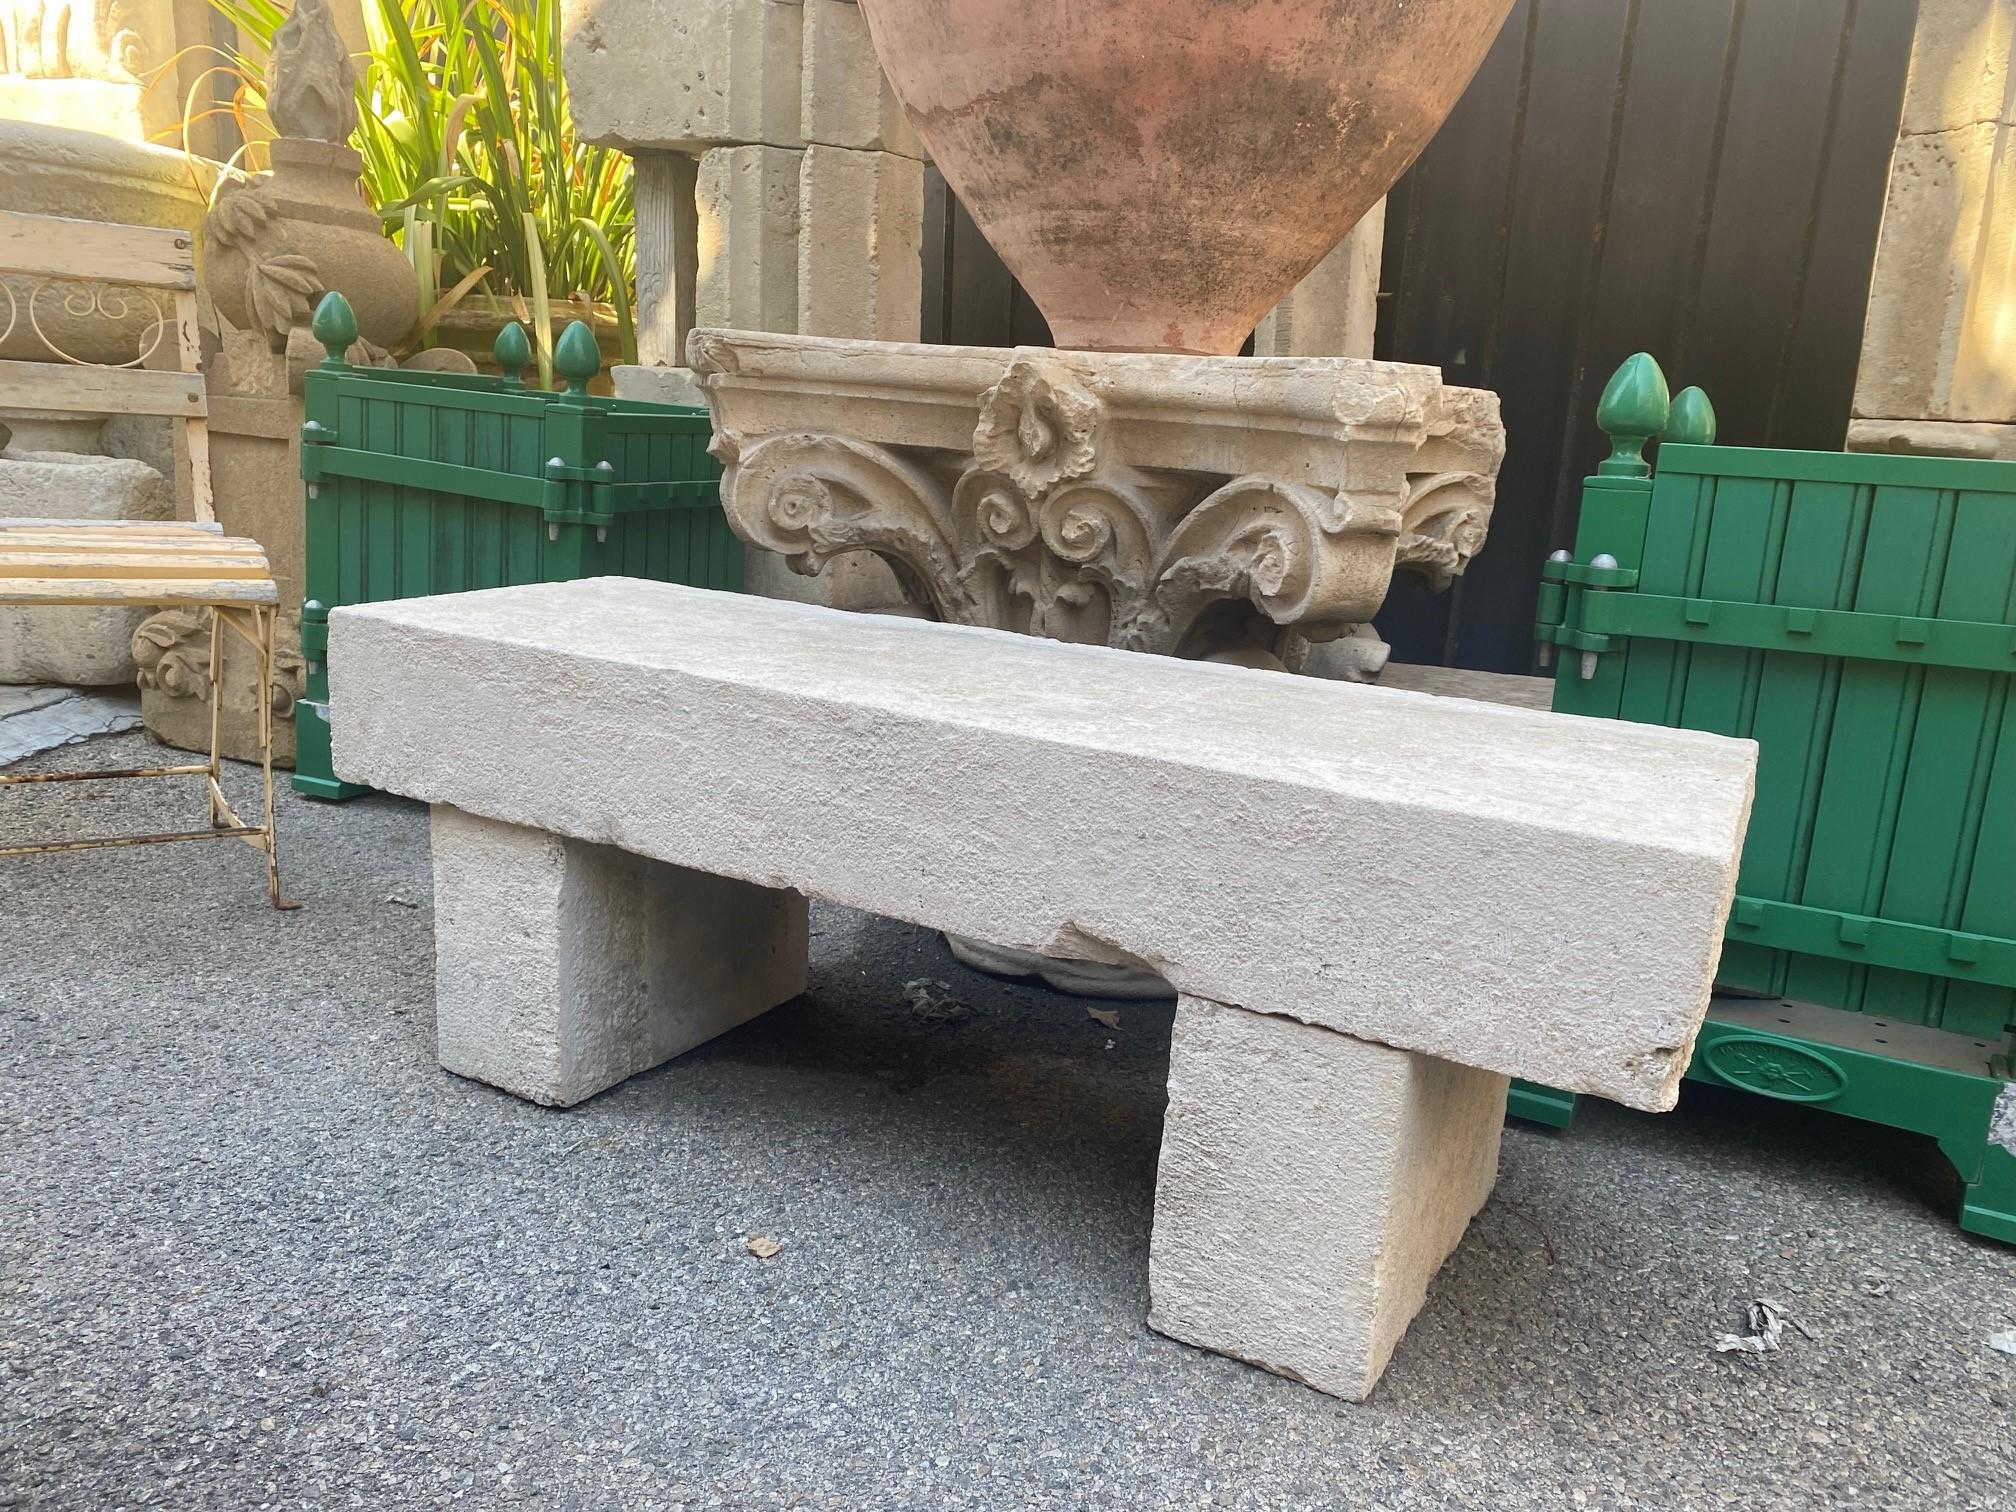 19th Century hand carved white garden thick stone bench. This beautiful Seat is garden bench with simple lines that works in an interior as a seat or decorative architectural sculpted element. Mounted against a wall in a modern context with